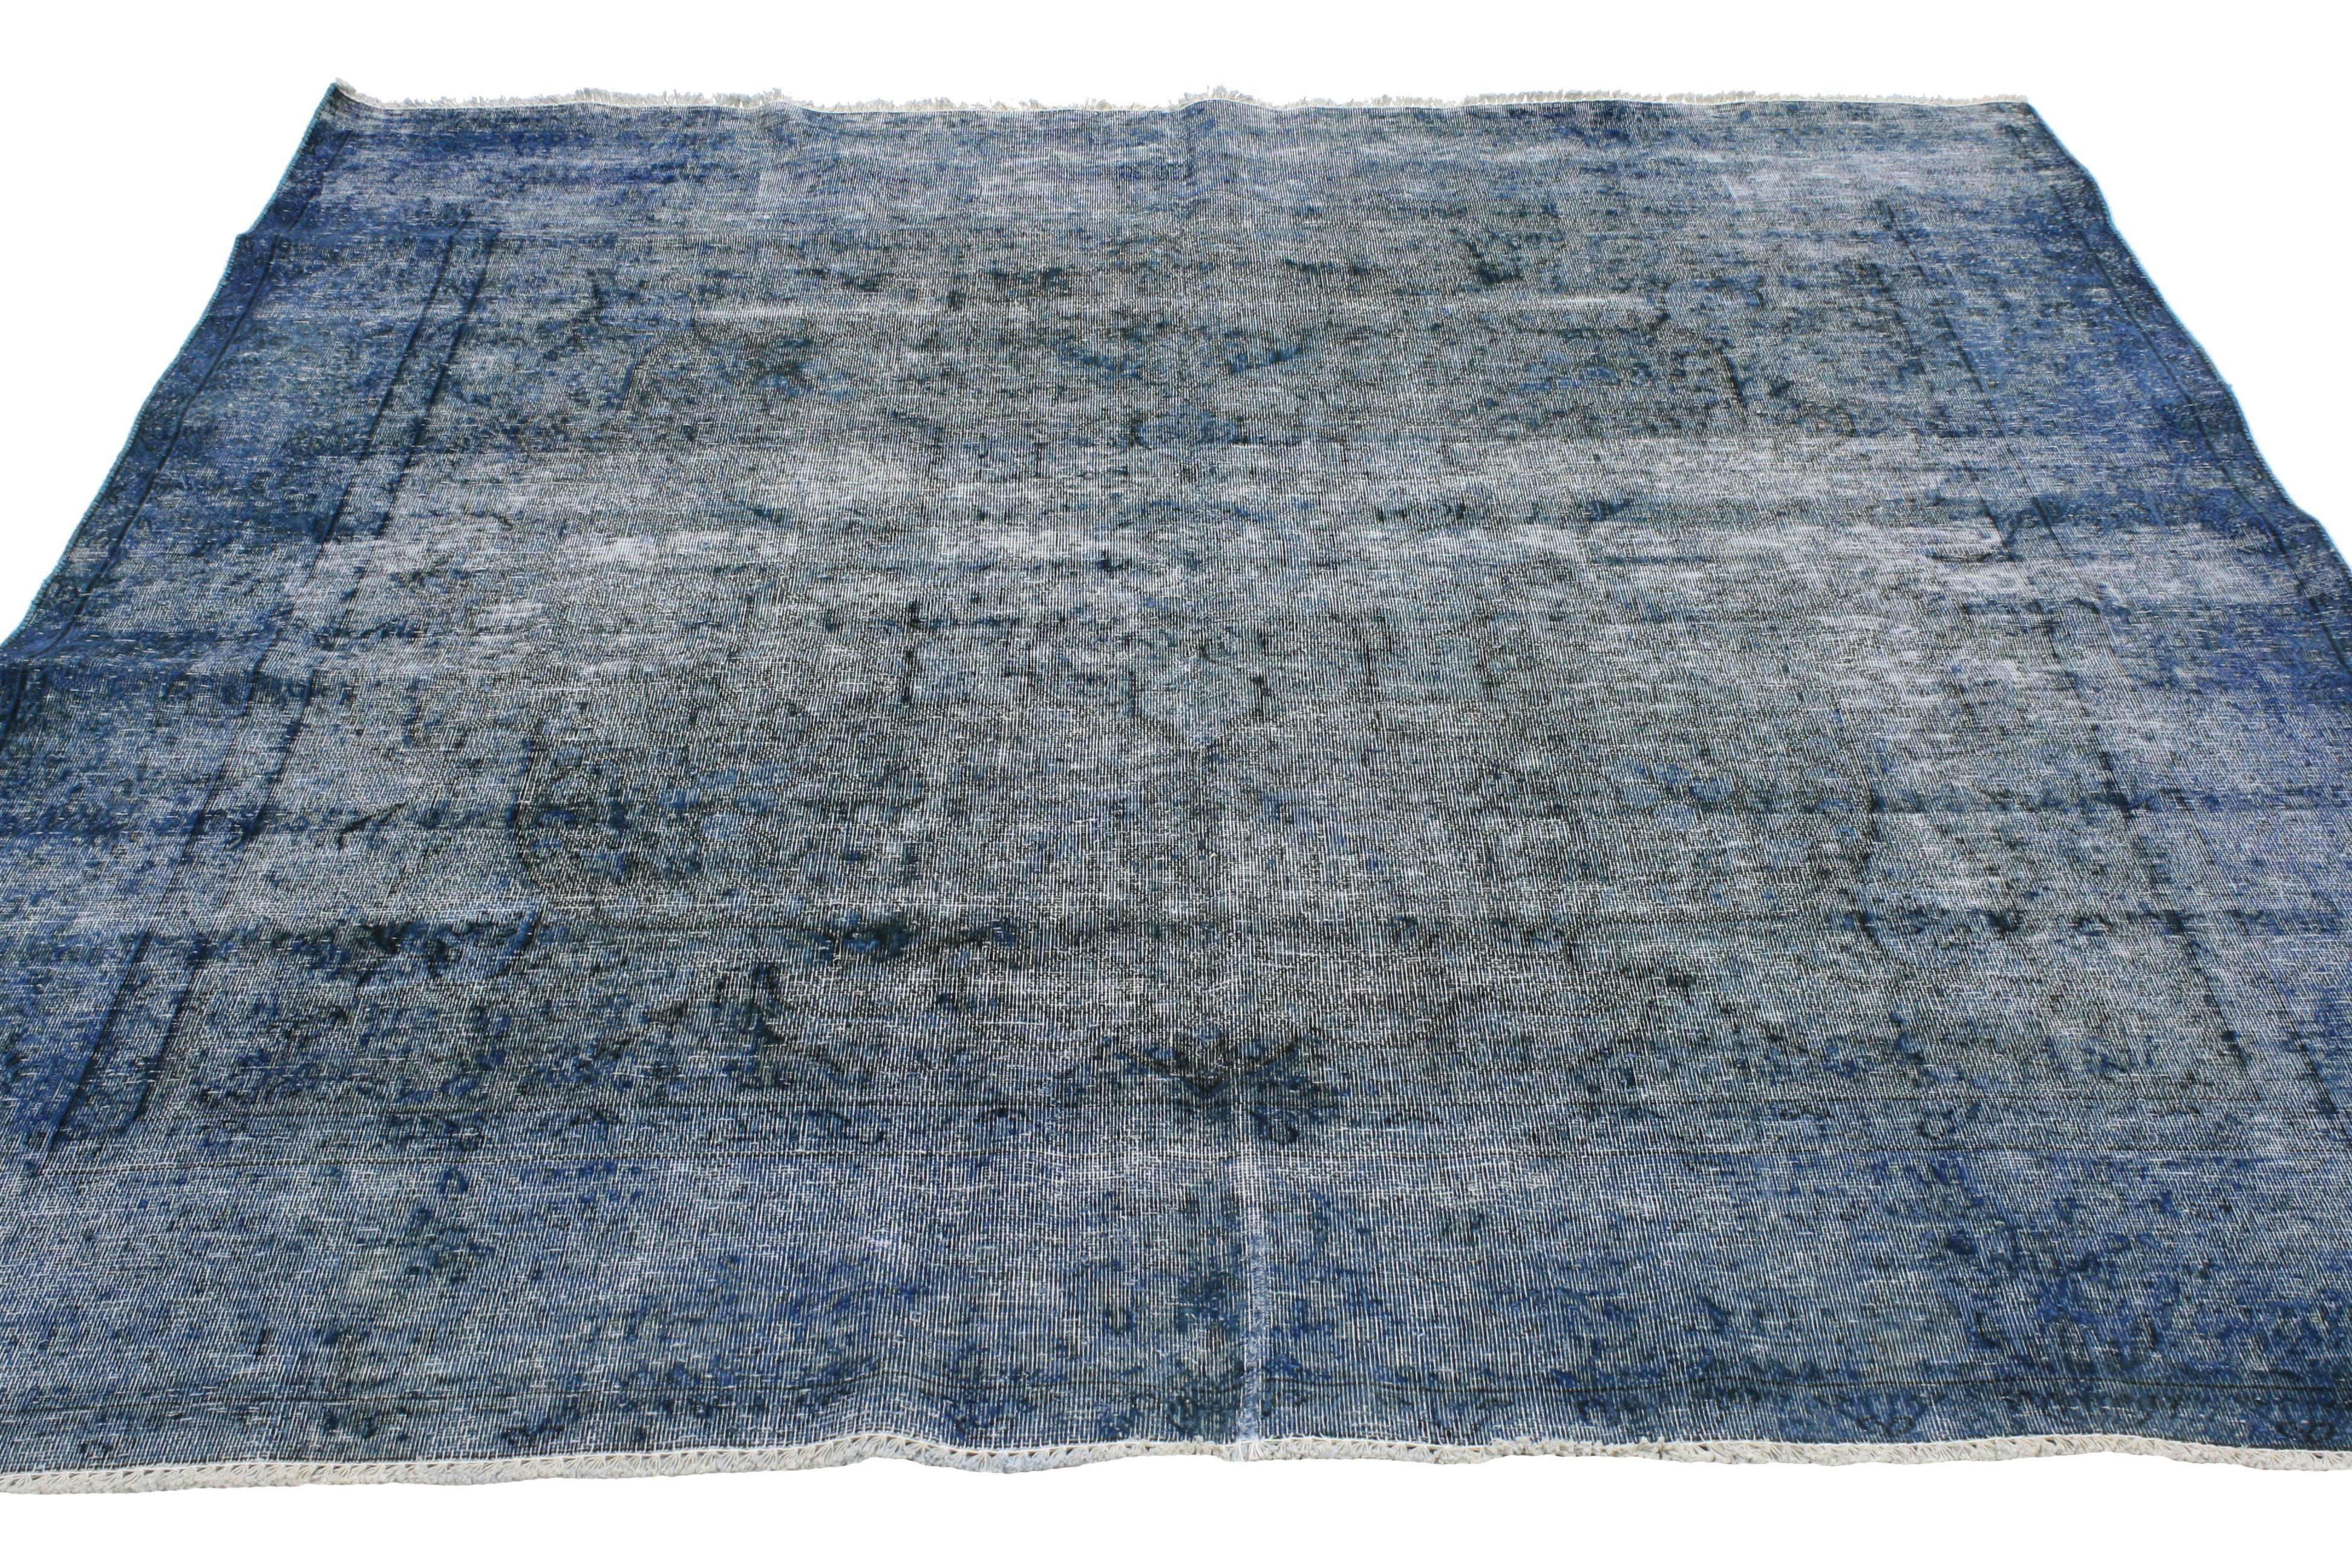 Hand-Knotted Distressed Overdyed Blue Persian Rug with Modern Industrial Style, Square Rug